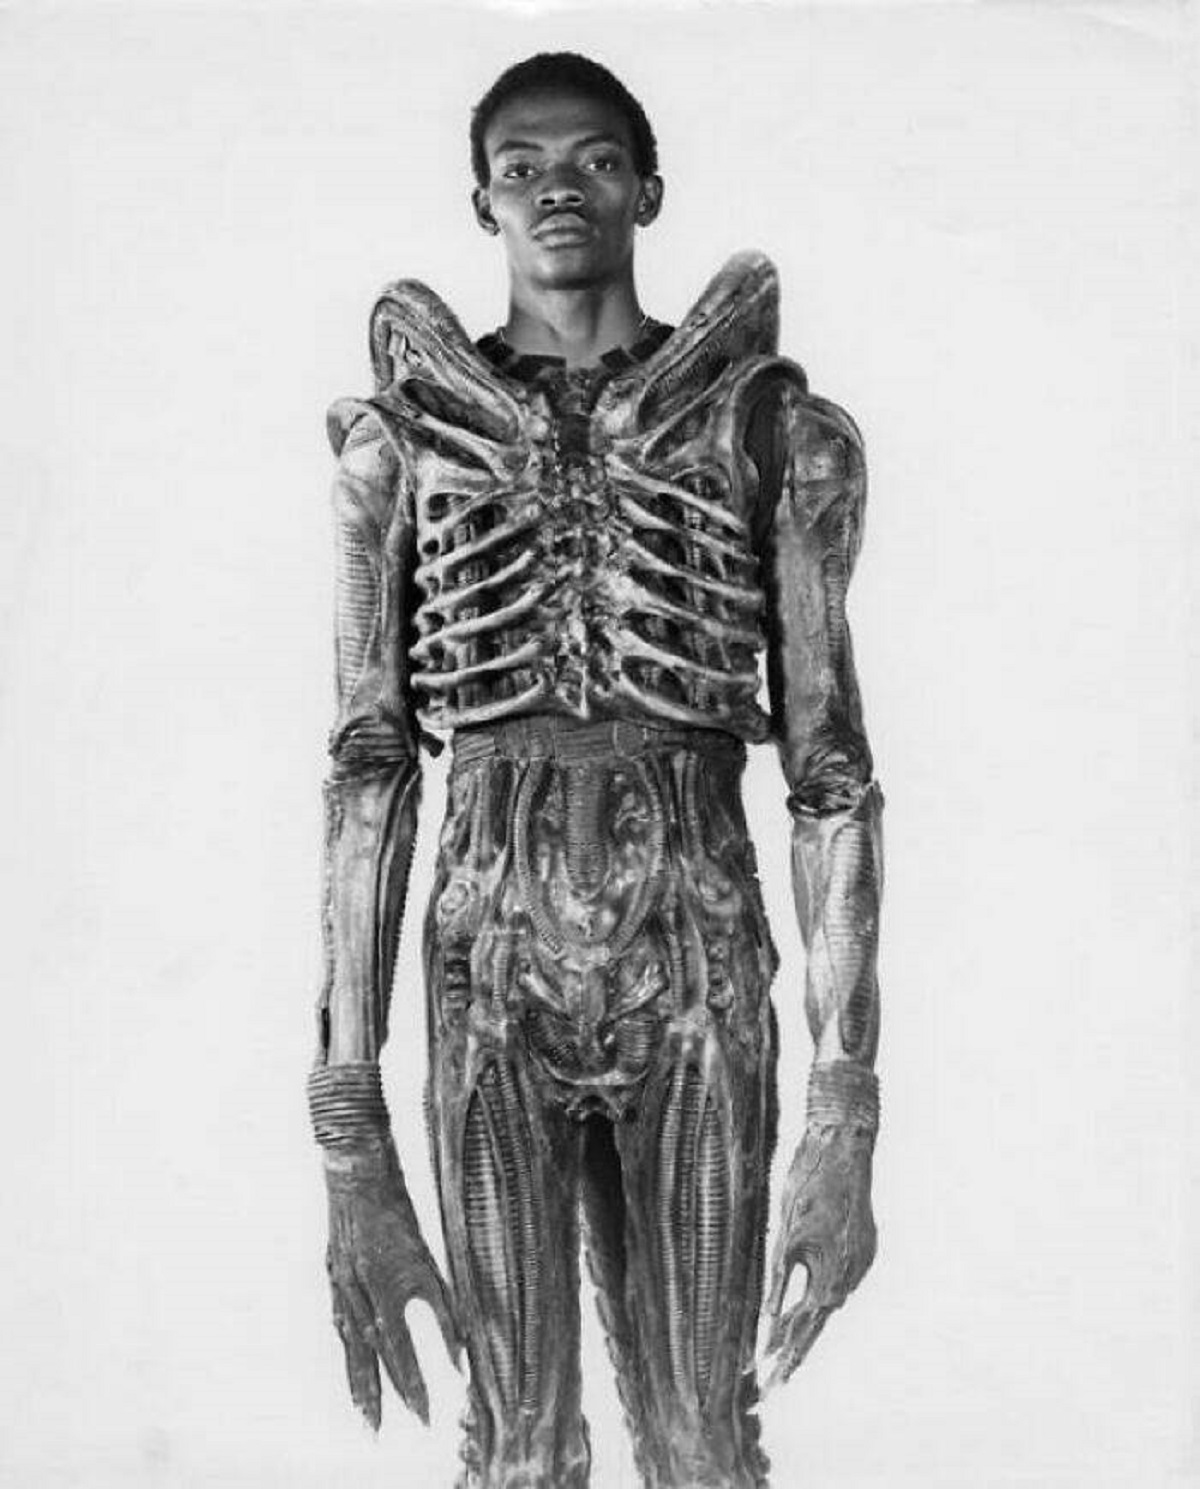 "Balaji Badejo. Who Played Alien In 1979. This Man Scared The F@#k Out Of Millions Of People For Decades"